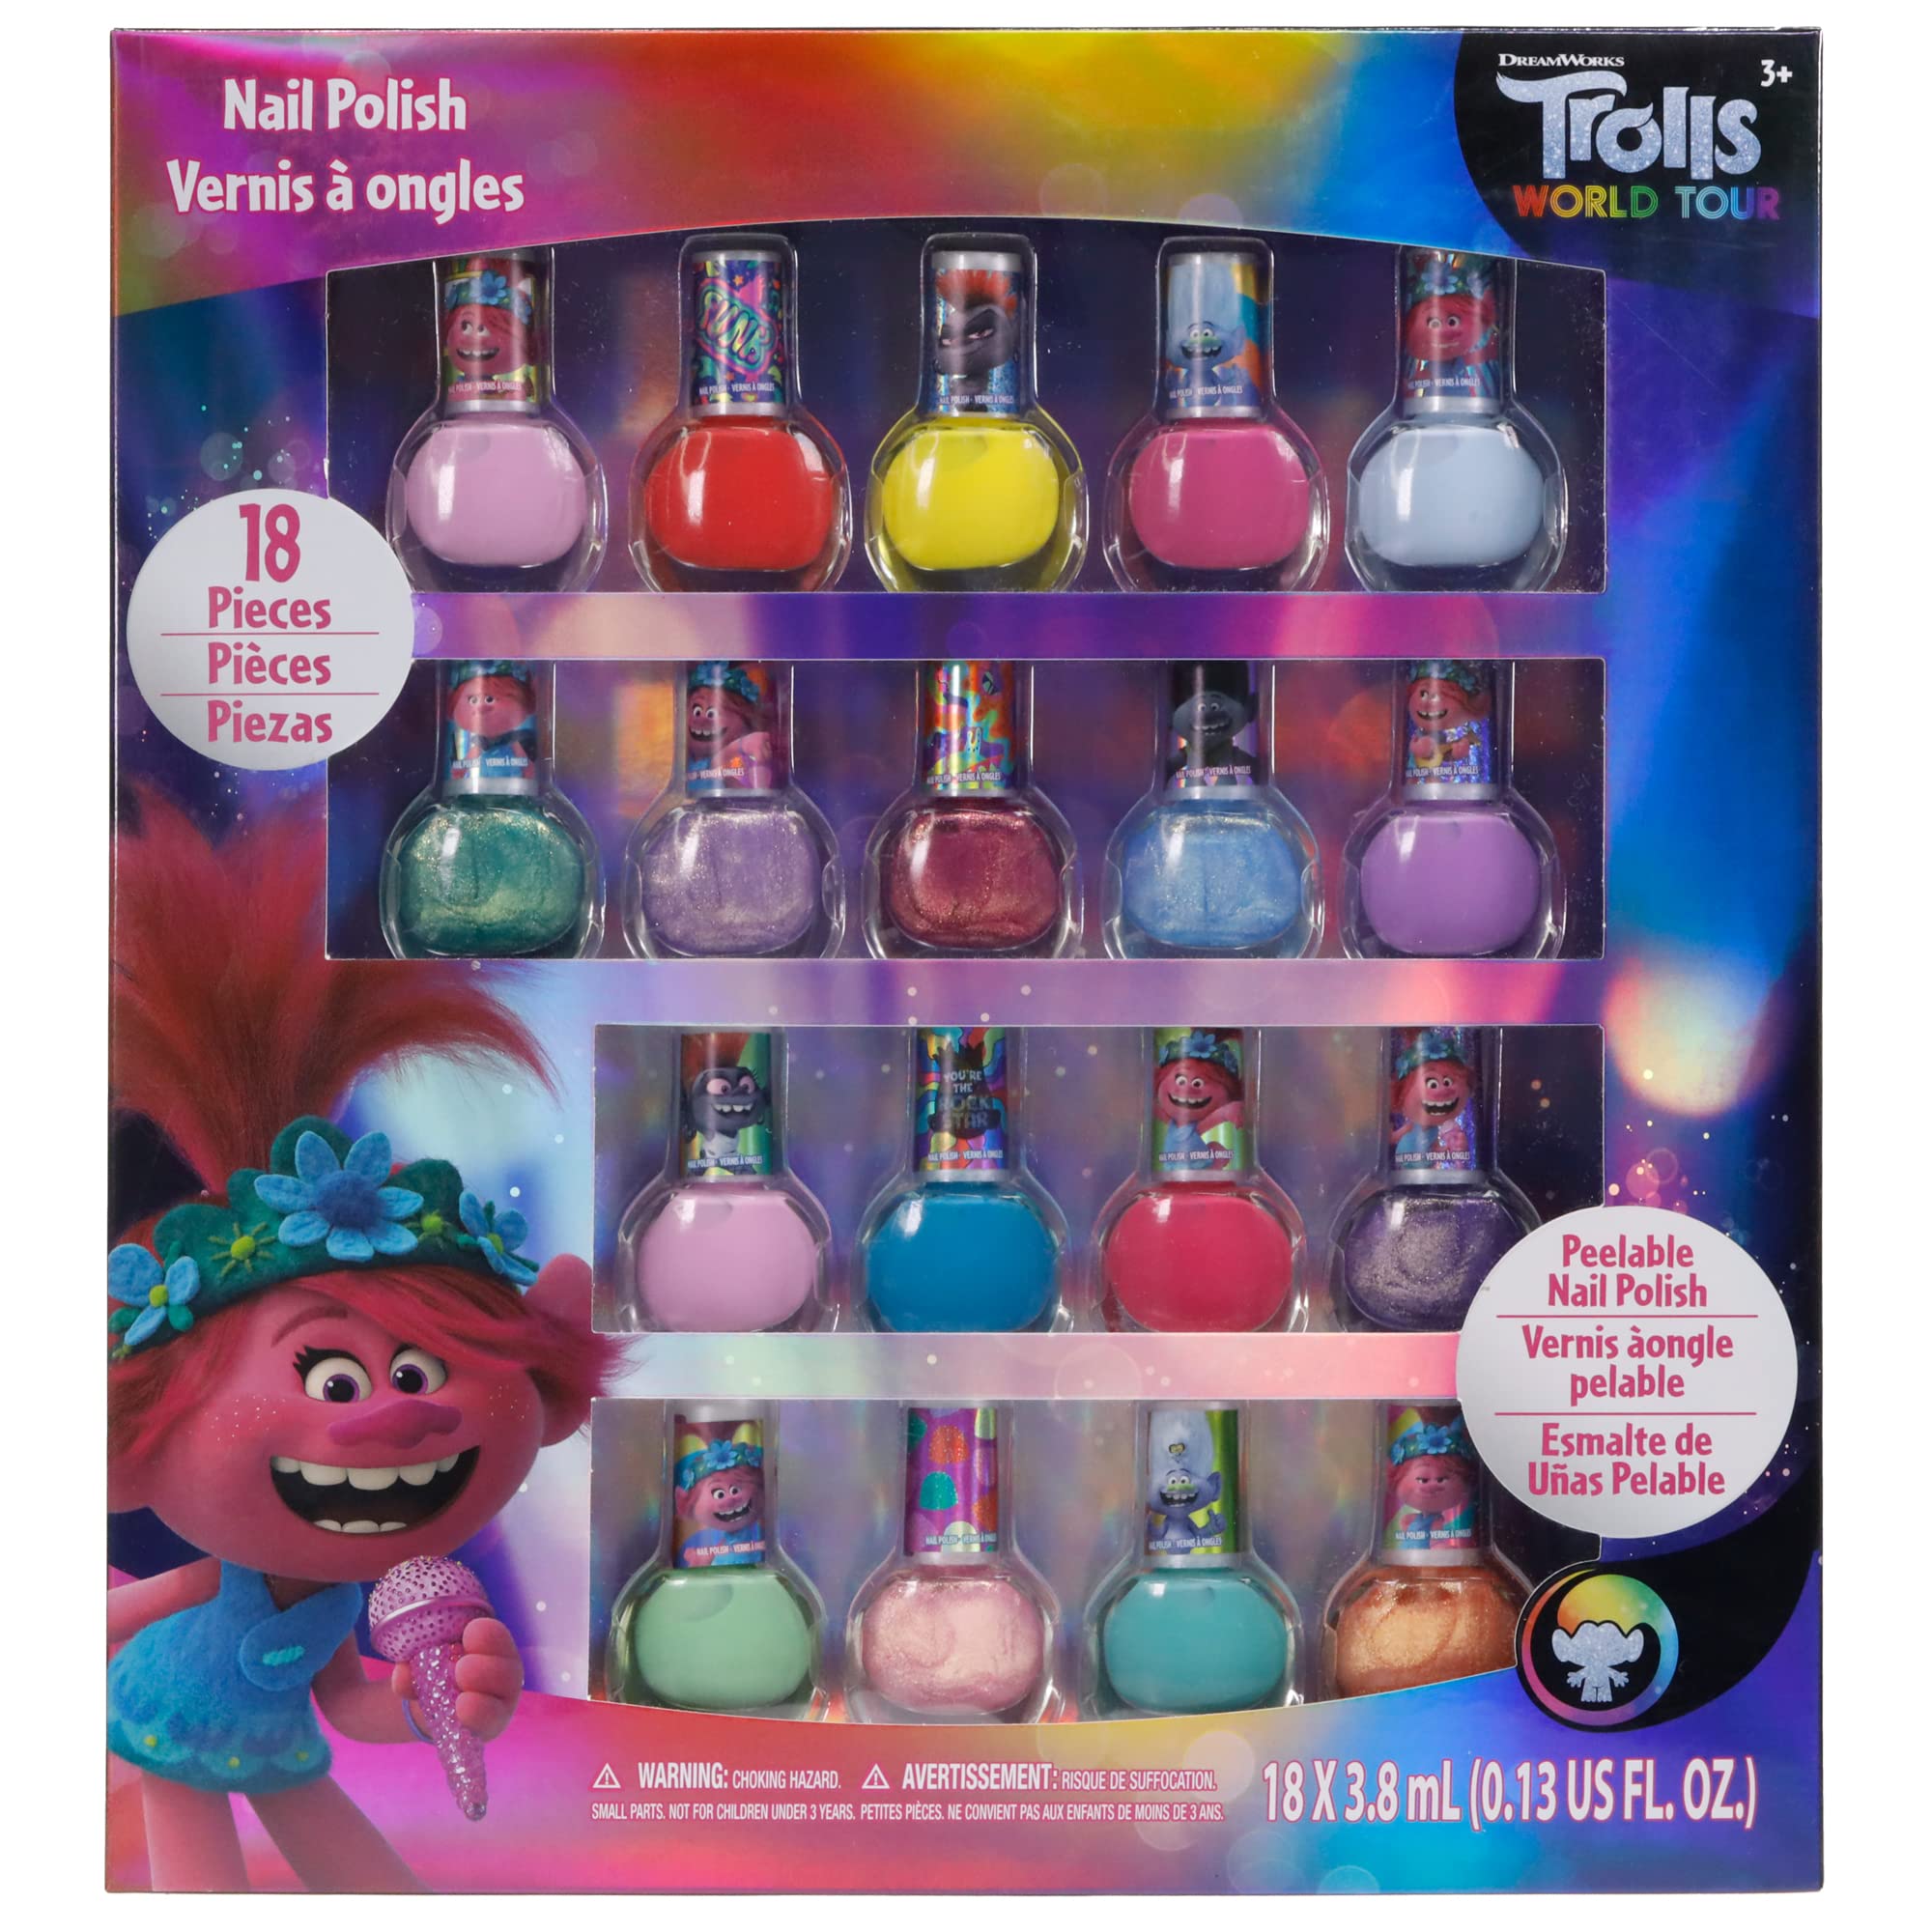 Townley Girl Trolls Peel-Off Water-Based Nail Polish Kit for Kids | Nail Paint Gift Set for Girls | Glittery and Opaque Colors | Ages 3+ (18 Pcs)